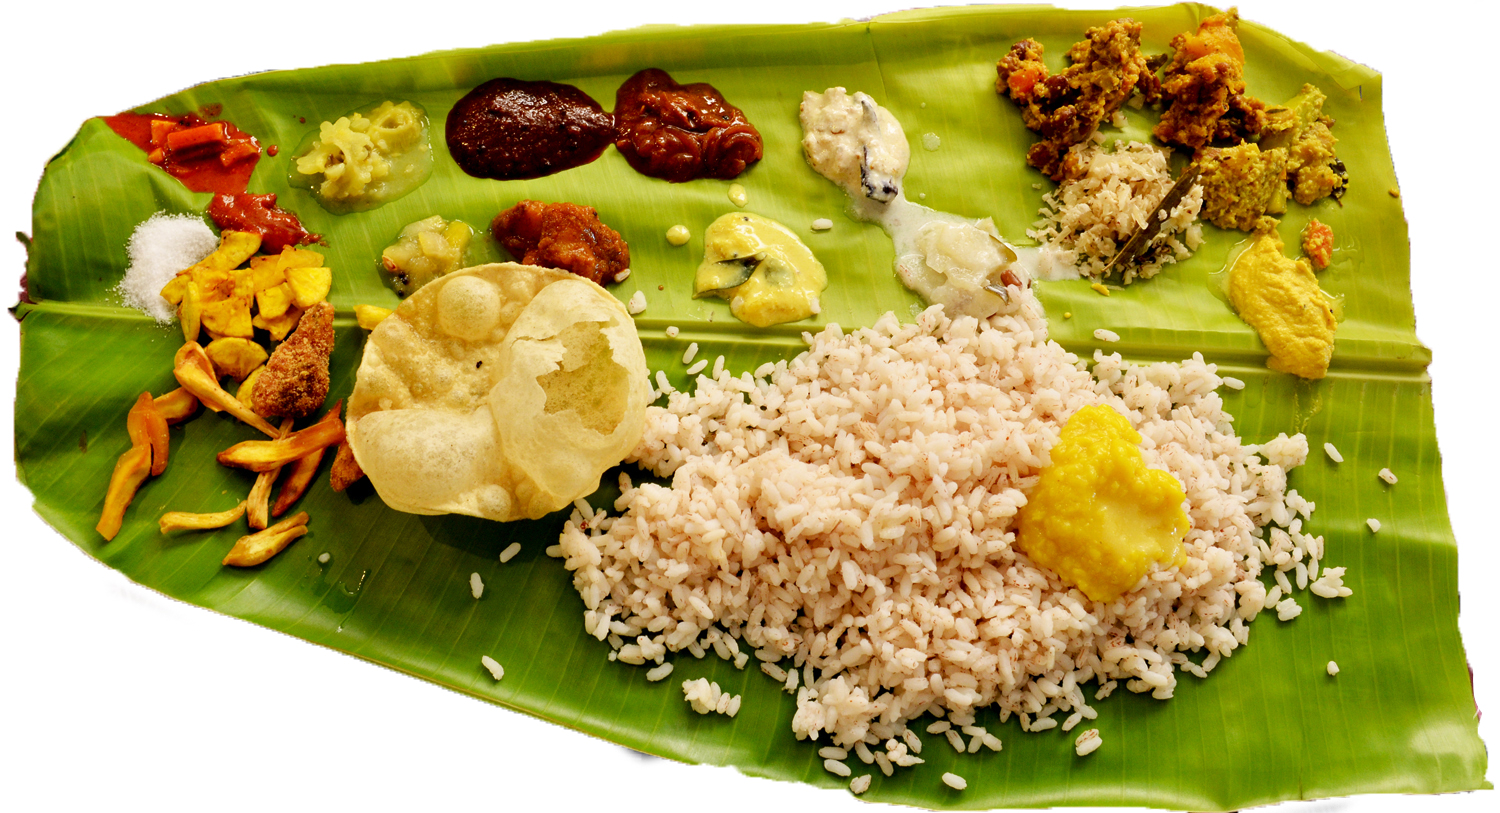 various foods and spices laid out on a banana leaf